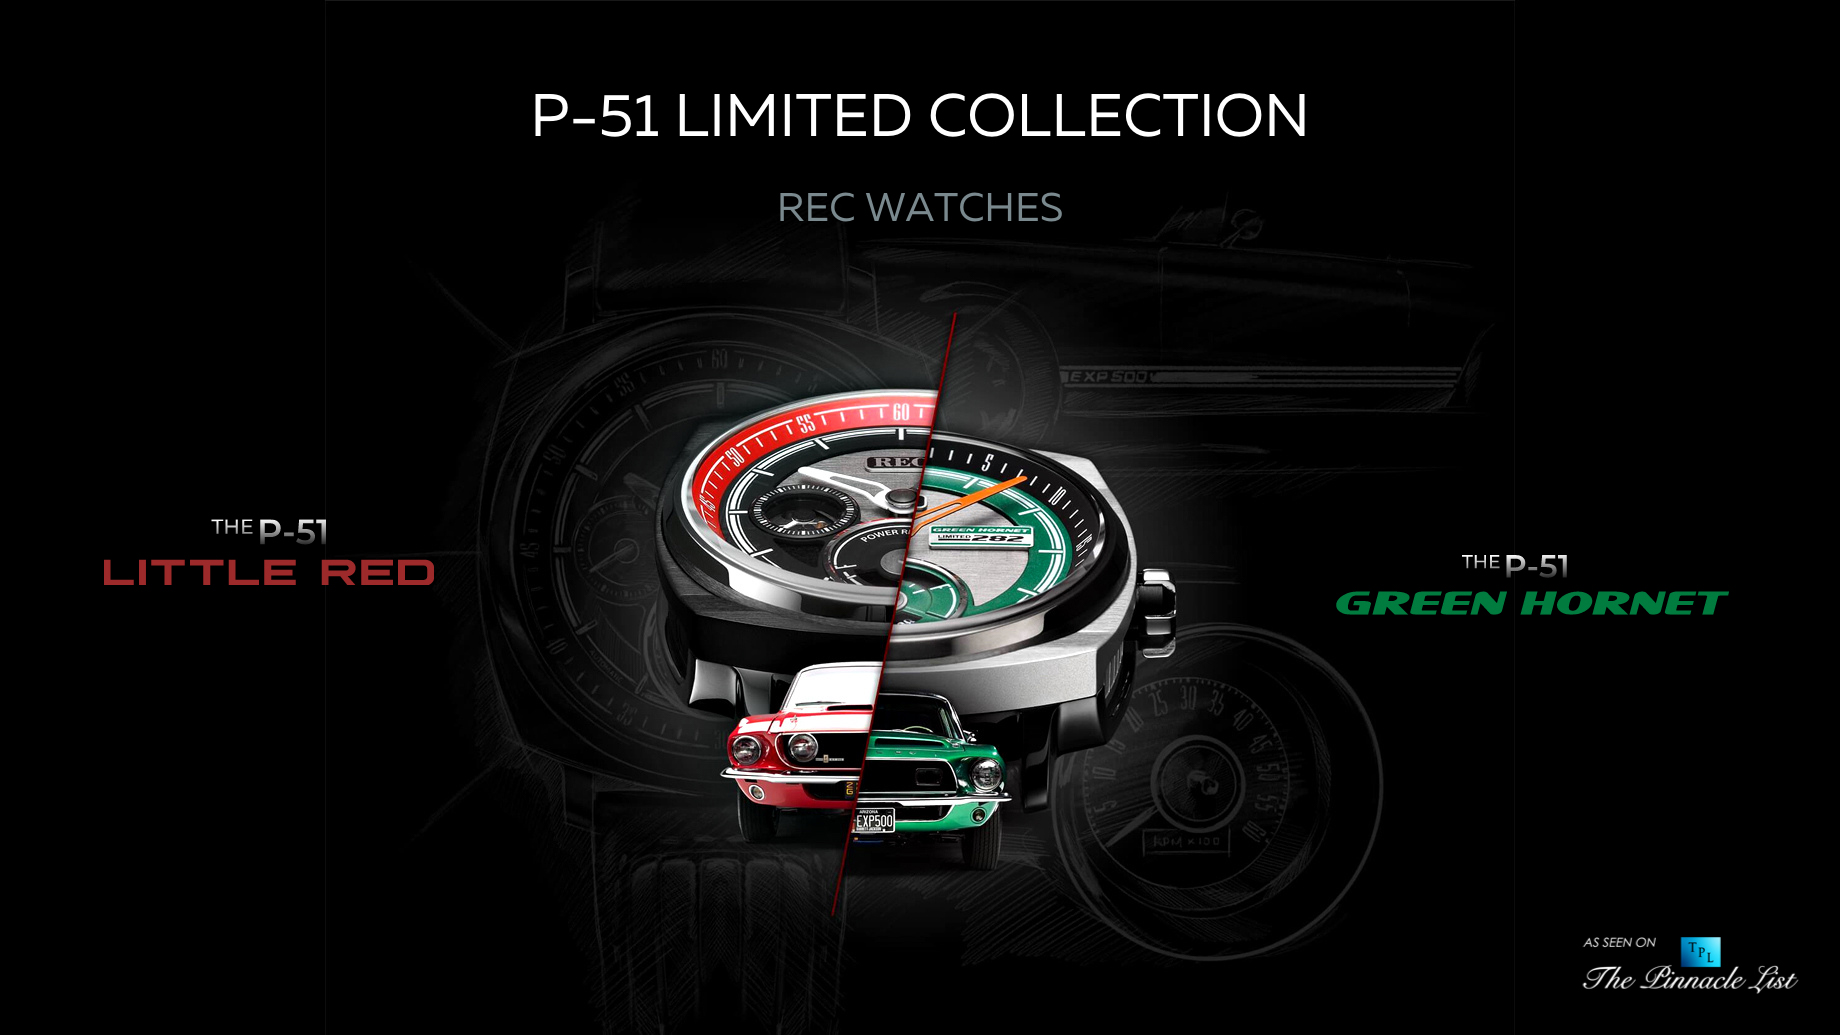 REC Watches Iconic P-51 Little Red & Green Hornet Limited Collection